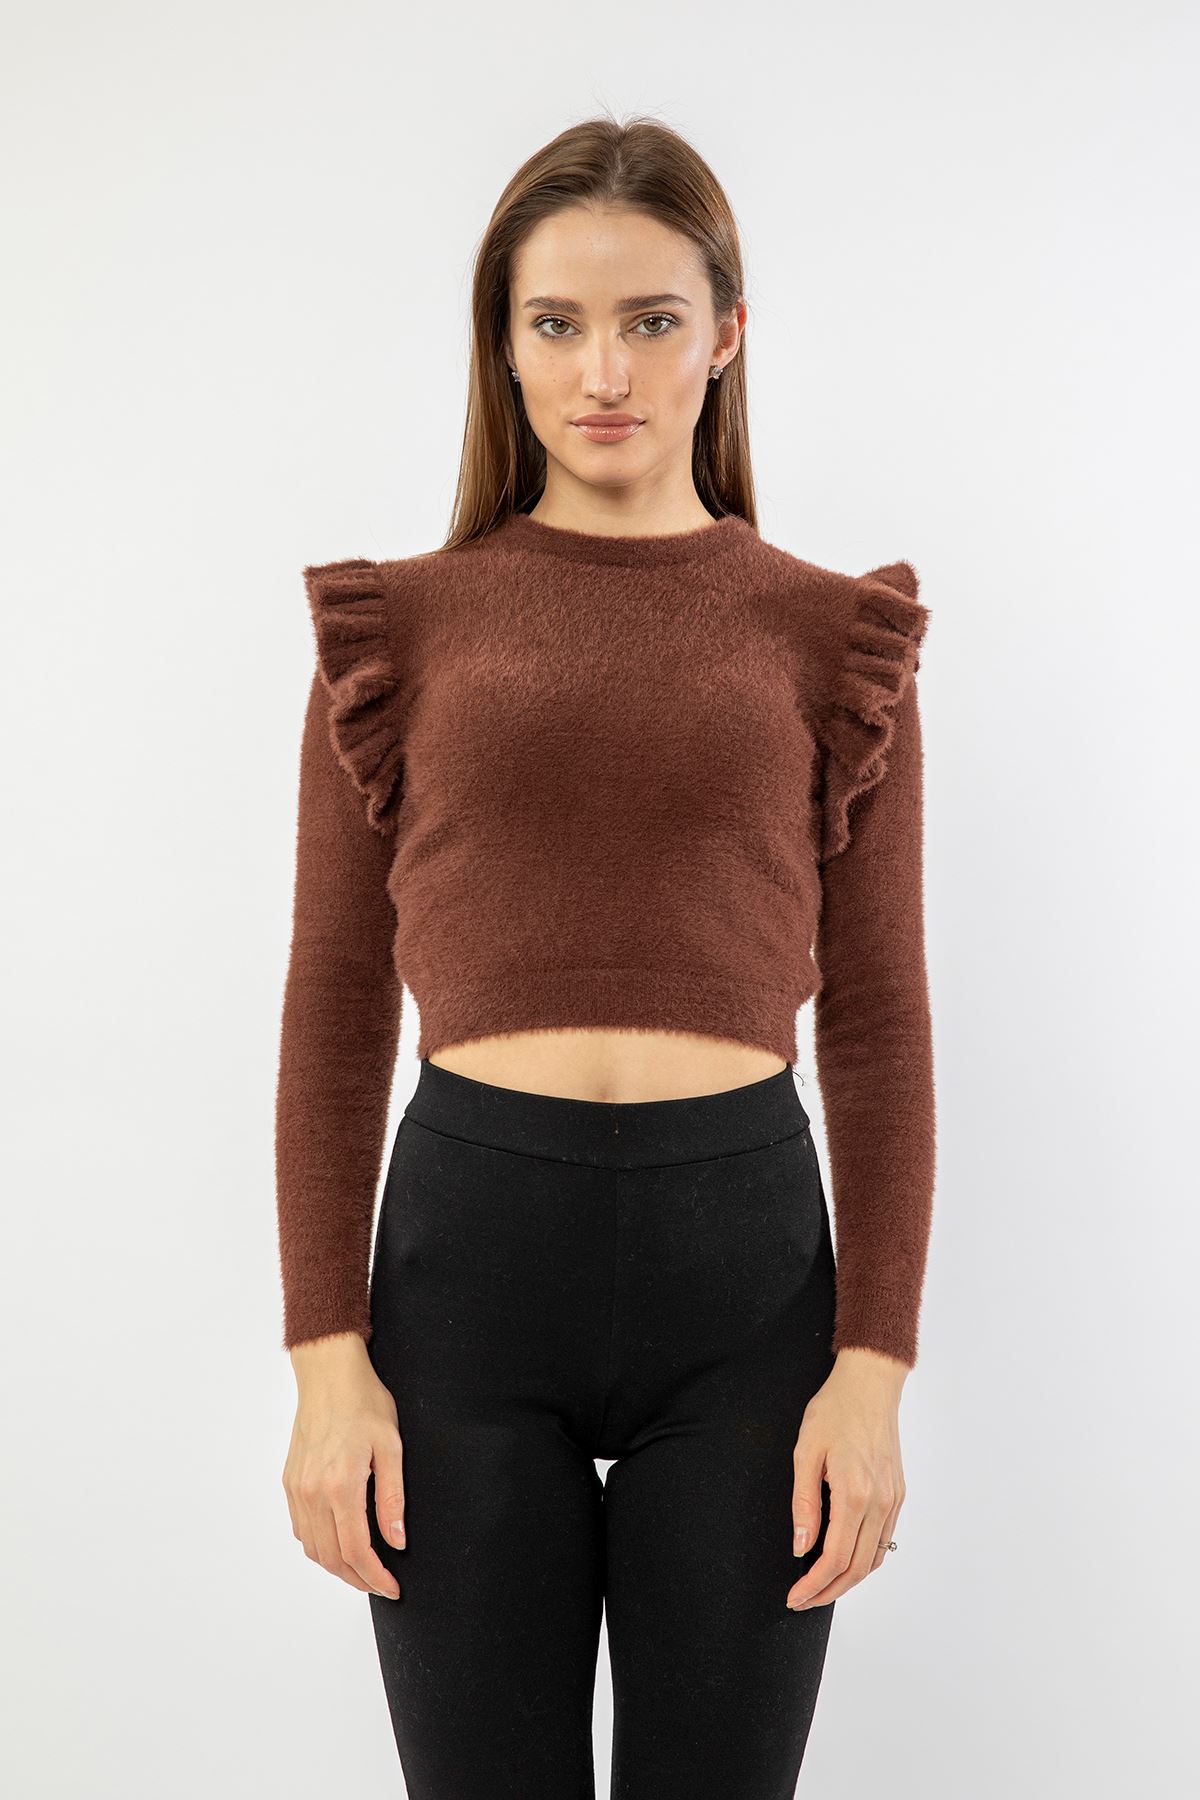 Jesica Fabric Long Sleeve Bicycle Collar Shoulder Detailed Women Sweater - Brown